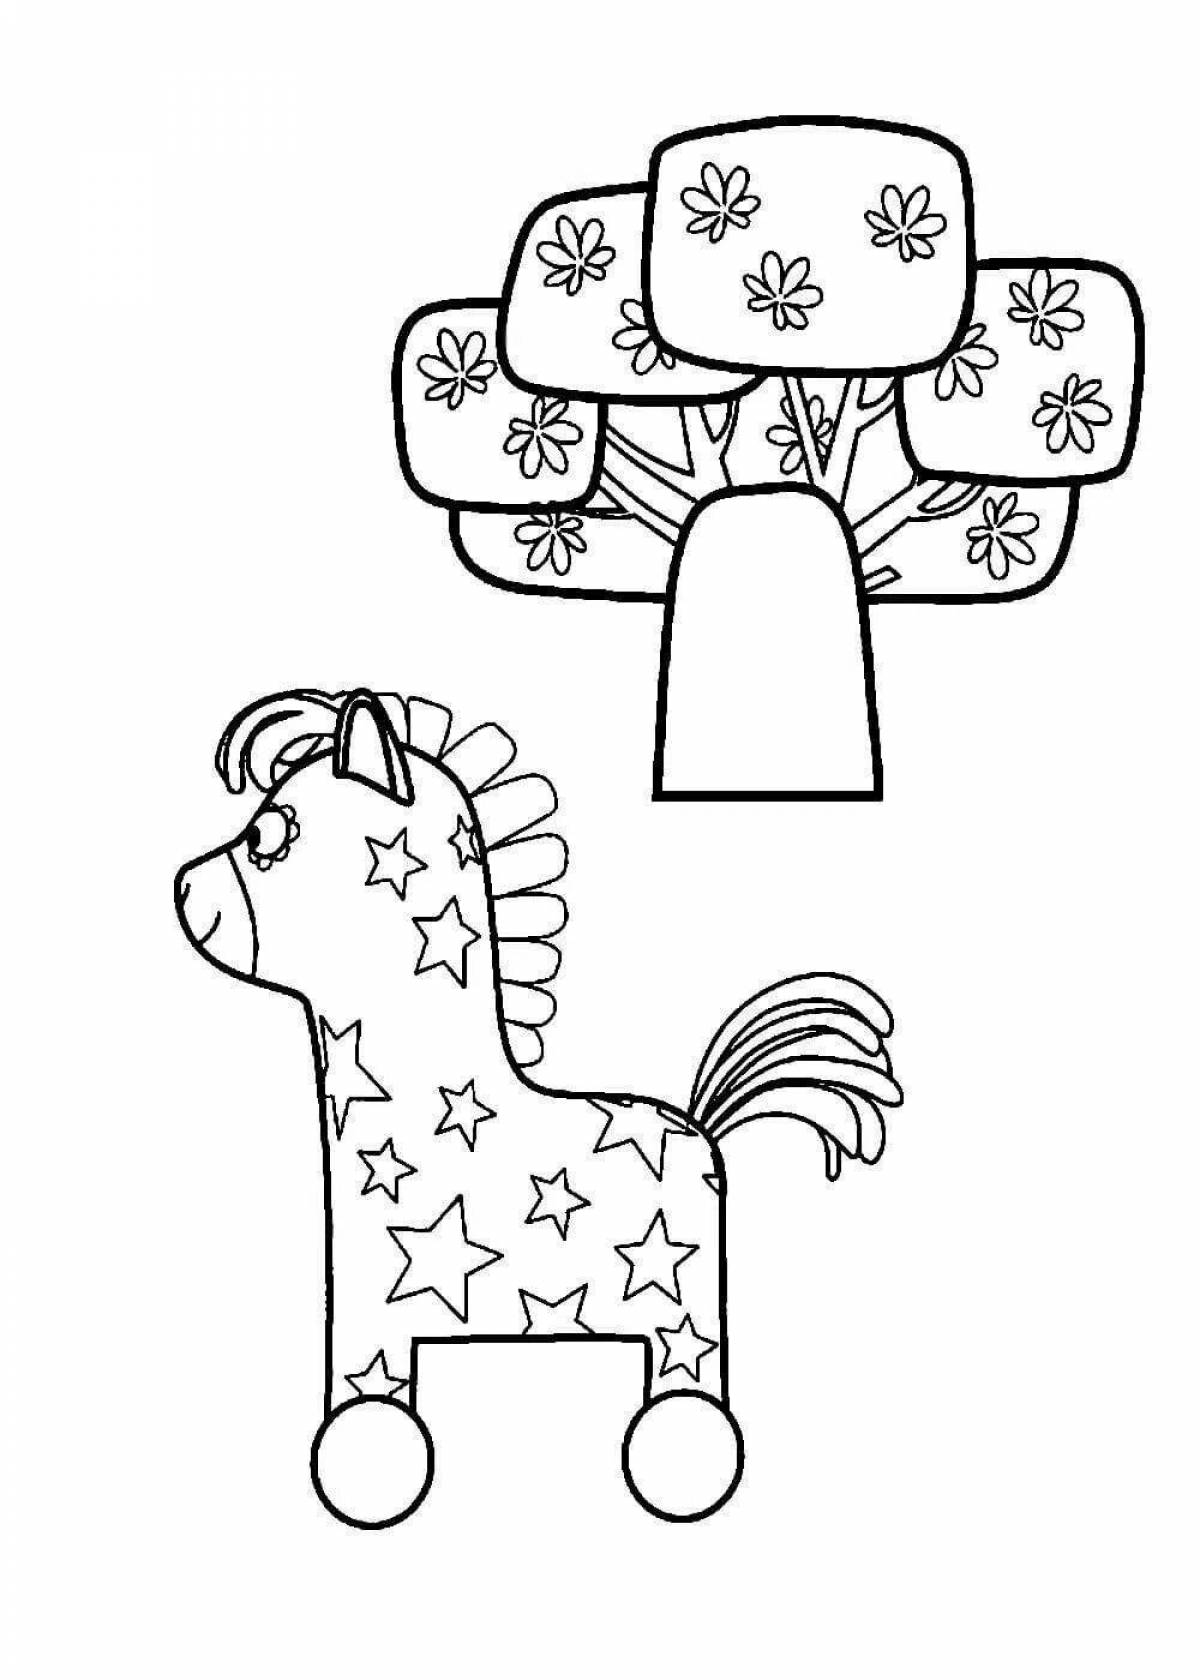 Coloring page graceful wooden dog